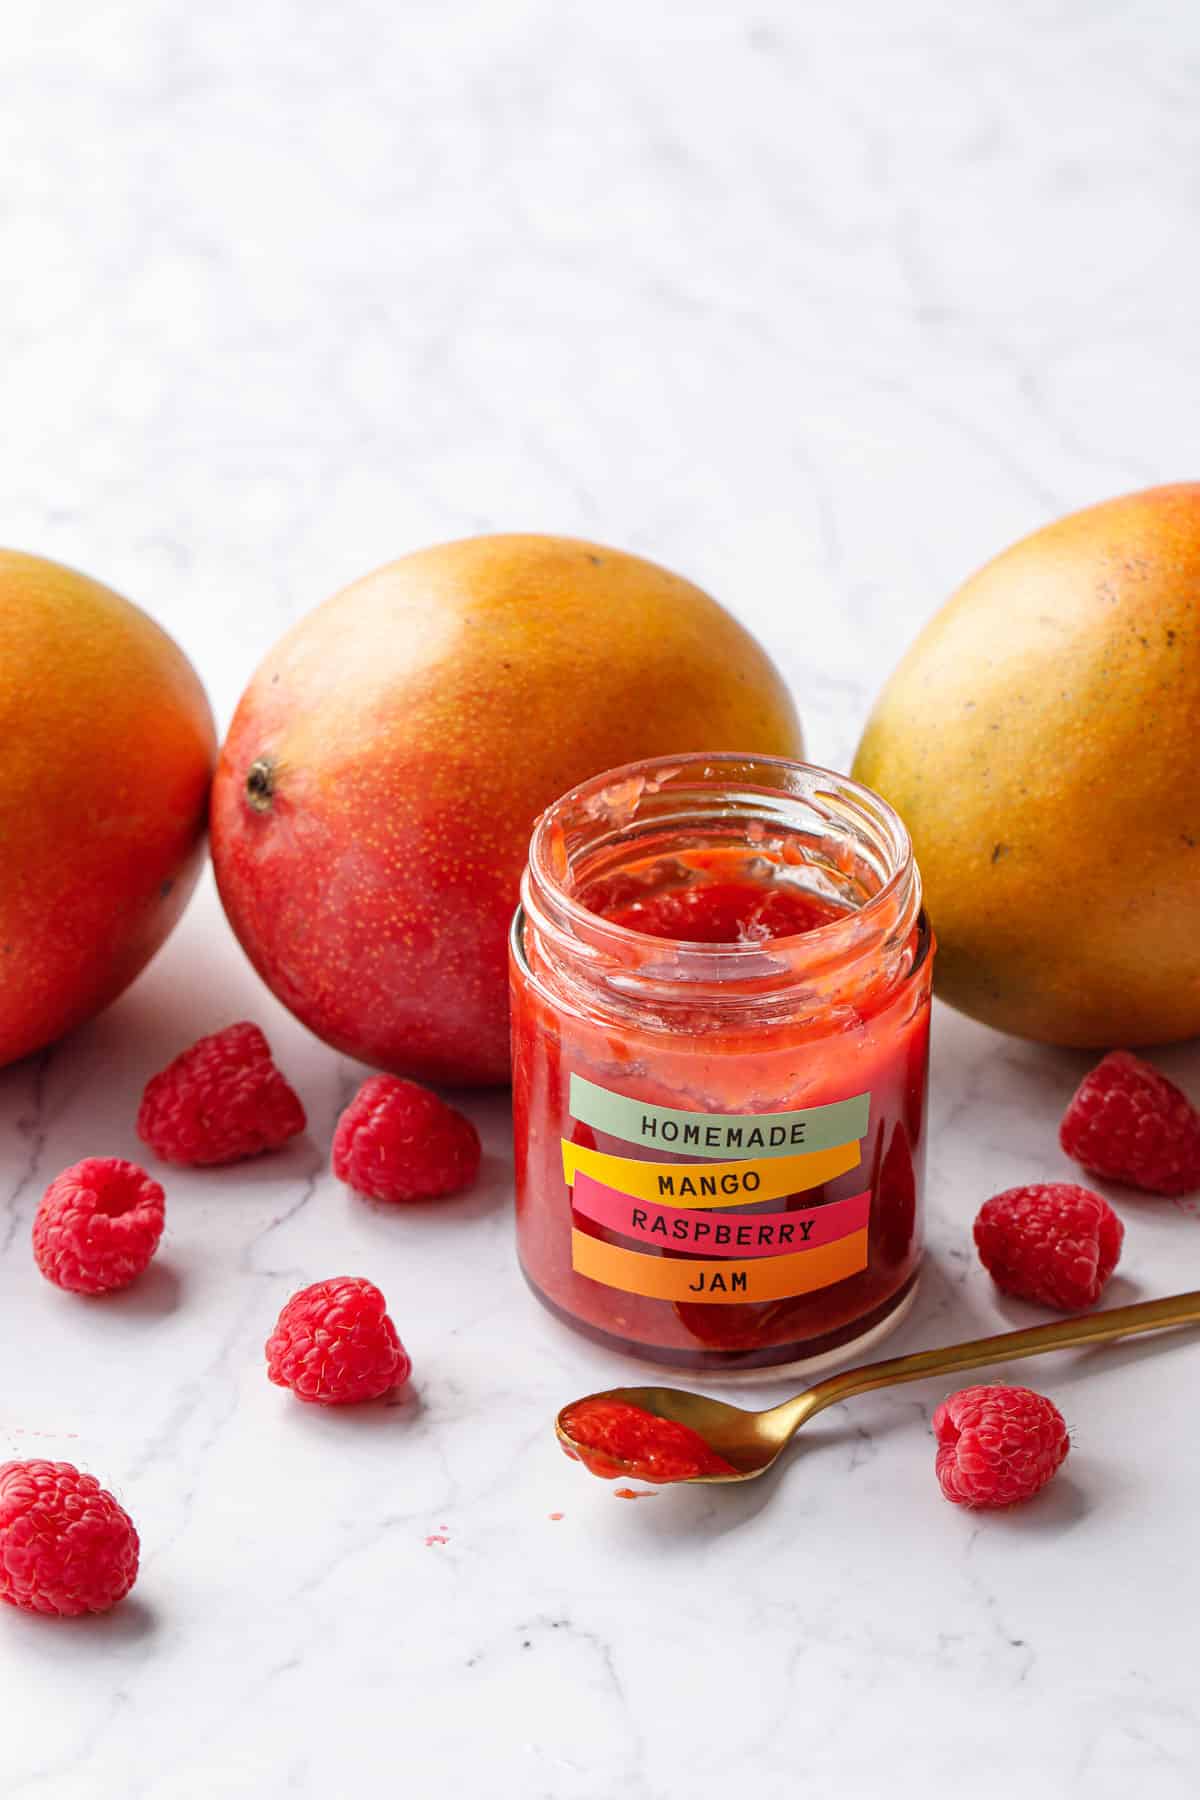 Row of mangoes with scattered raspberries and a jar of Mango Raspberry Jam in front, with a gold spoon filled with jam.